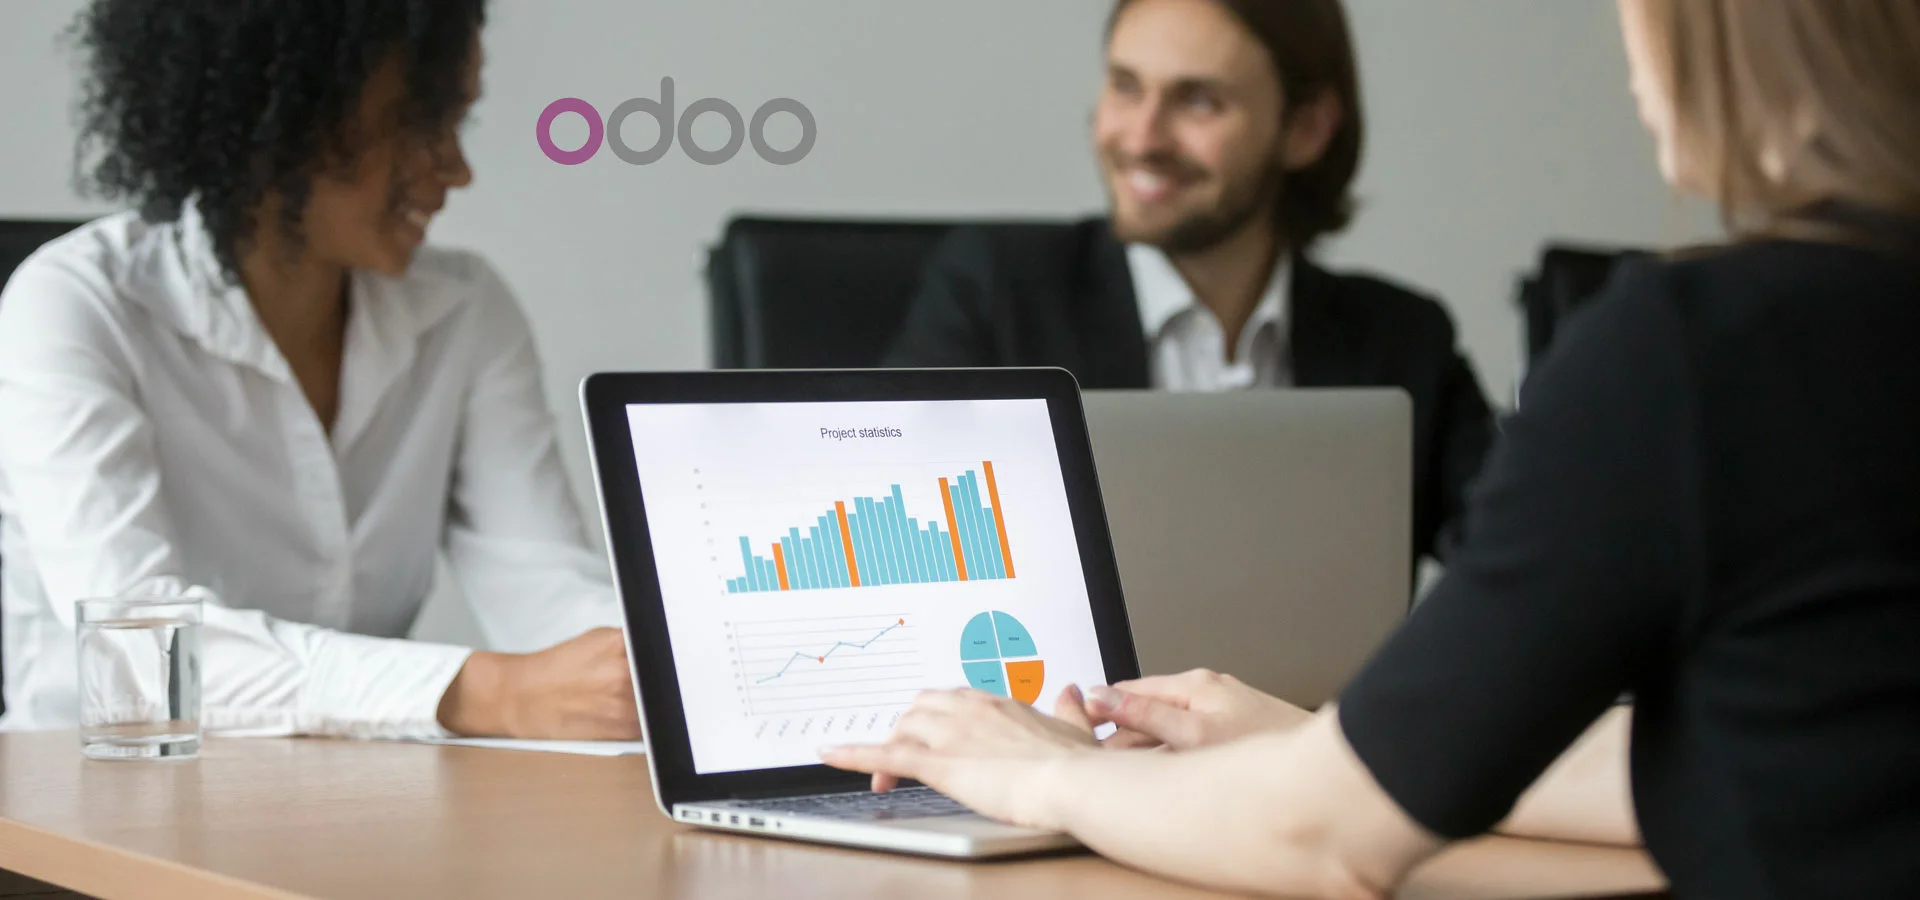 odoo-erp-support-and-services-related-blog-147